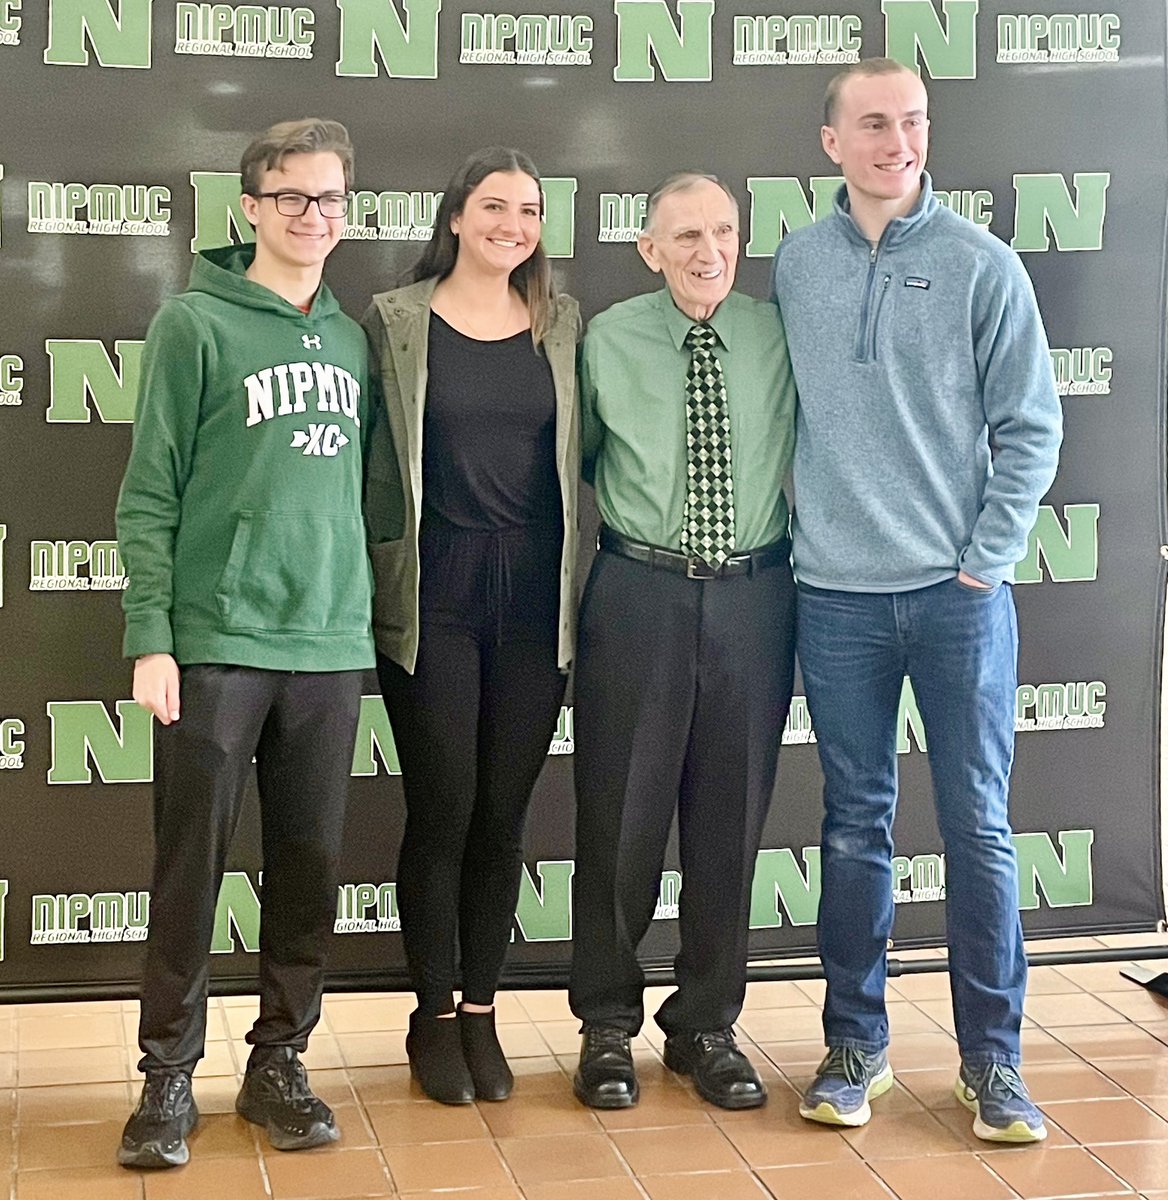 Congratulations to Coach Auger being inducted into the Nipmuc HOF! Pictures with some of his younger protégés. Sam Aubut ‘24, Emma Nadolski ‘23, Dan DeZutter ‘20 @NipmucAD @NipmucRegional @CoachTownieXCTF